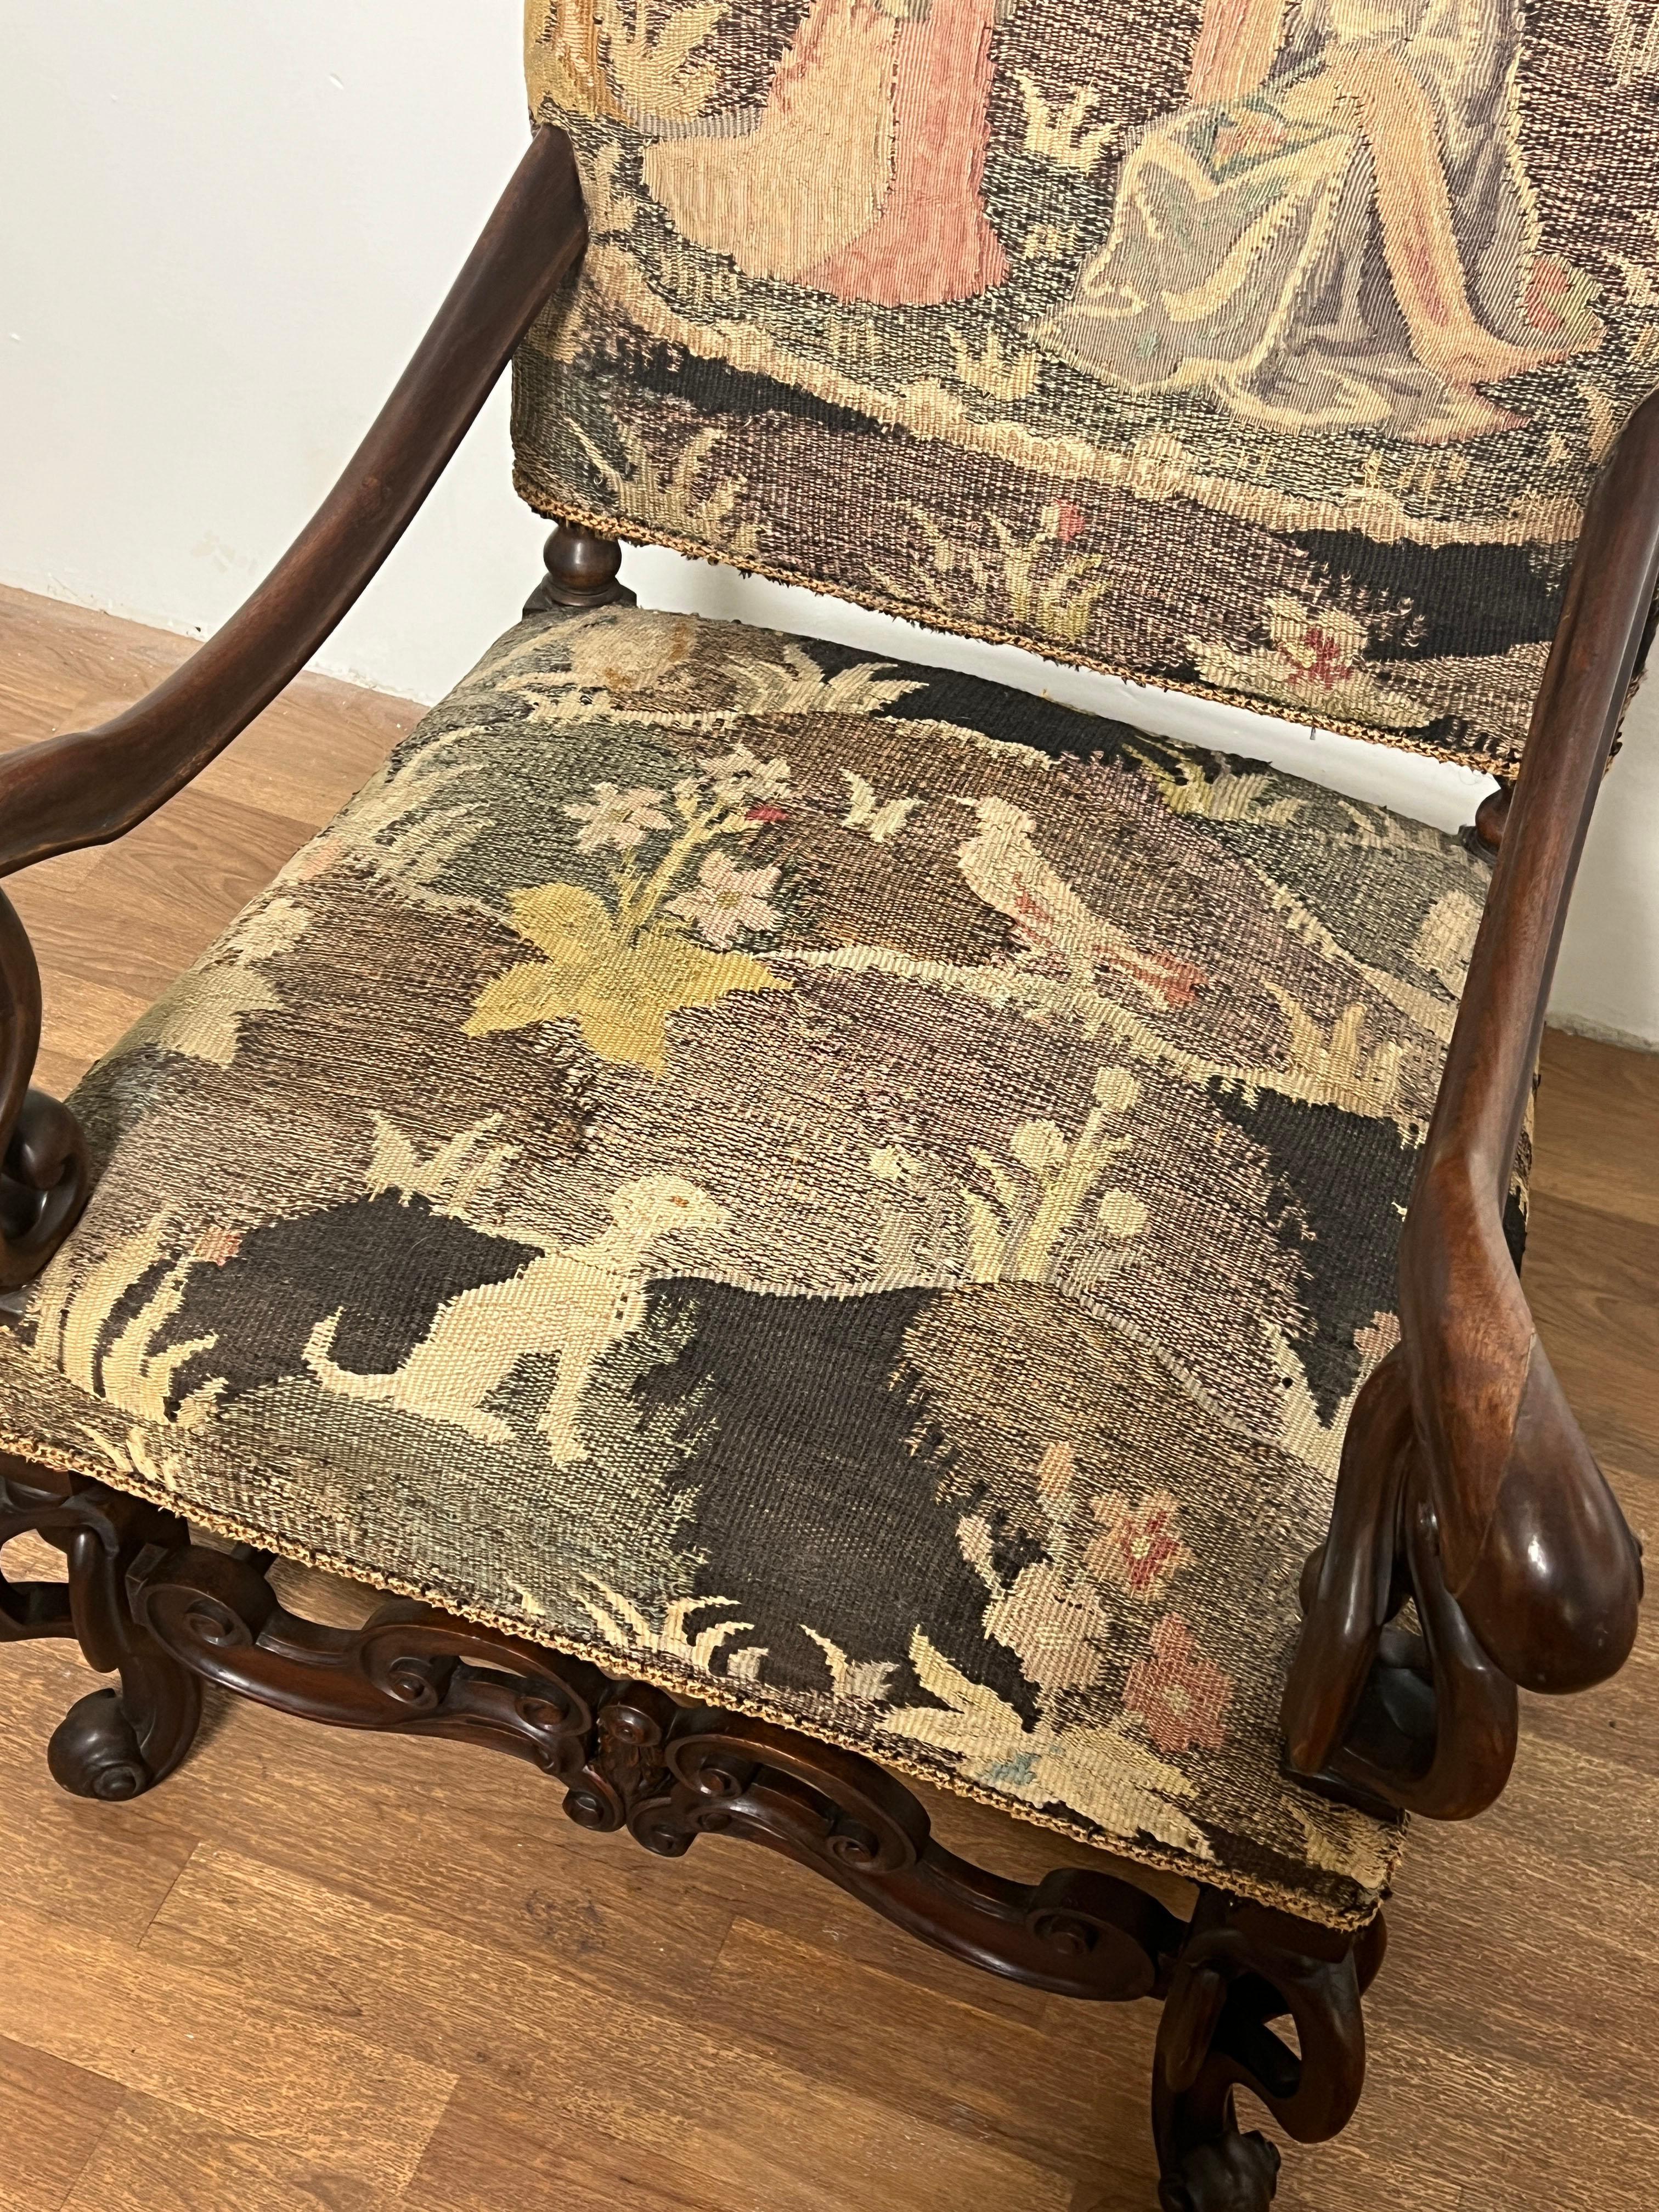 19th Century Renaissance Revival Arm Chair Upholstered in Belgian Tapestry  For Sale 6